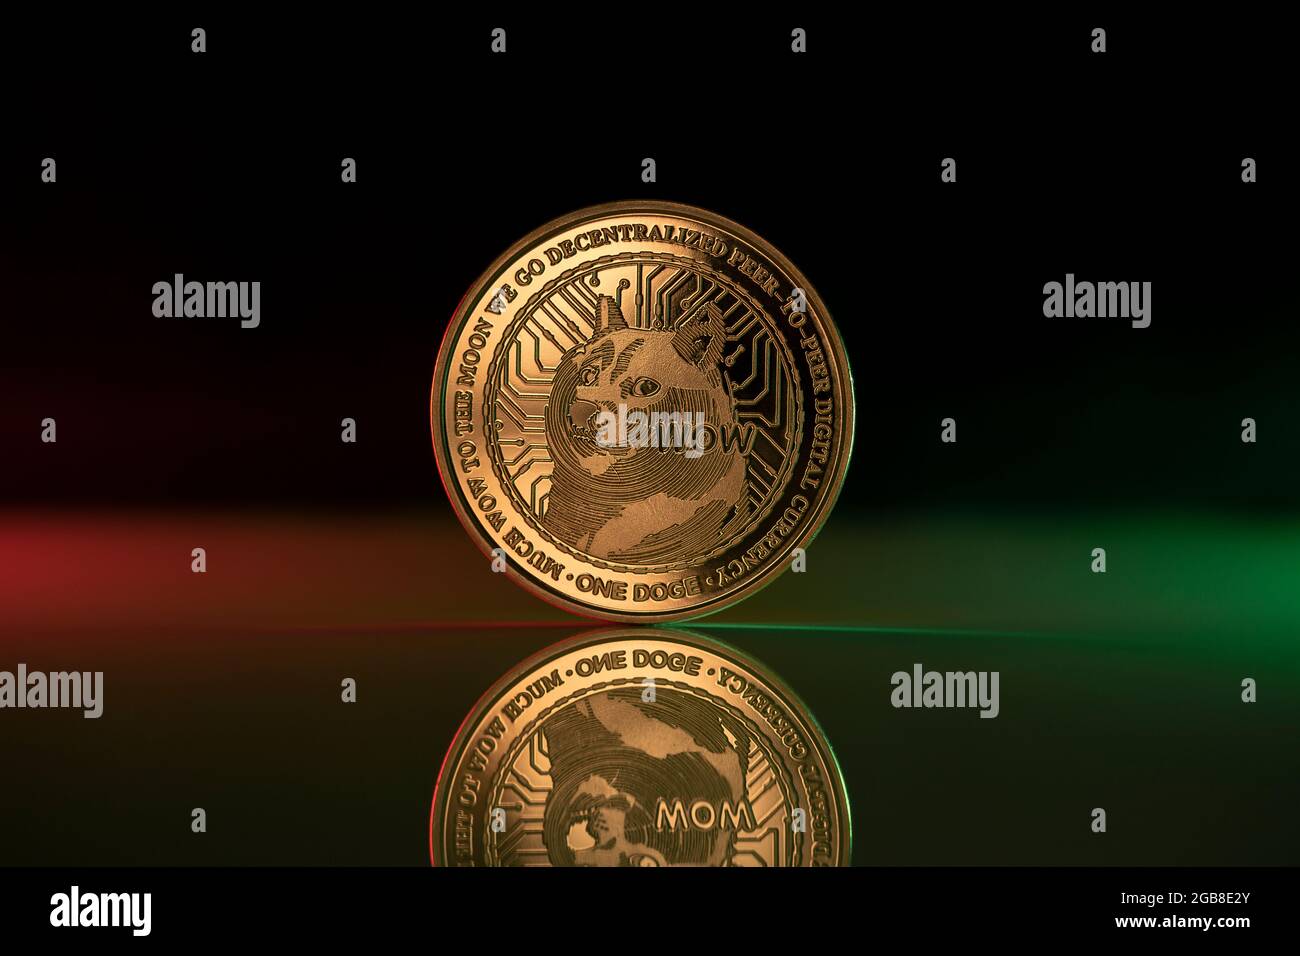 Doge cryptocurrency physical coin placed on reflective surface and lit with green and red lights Stock Photo